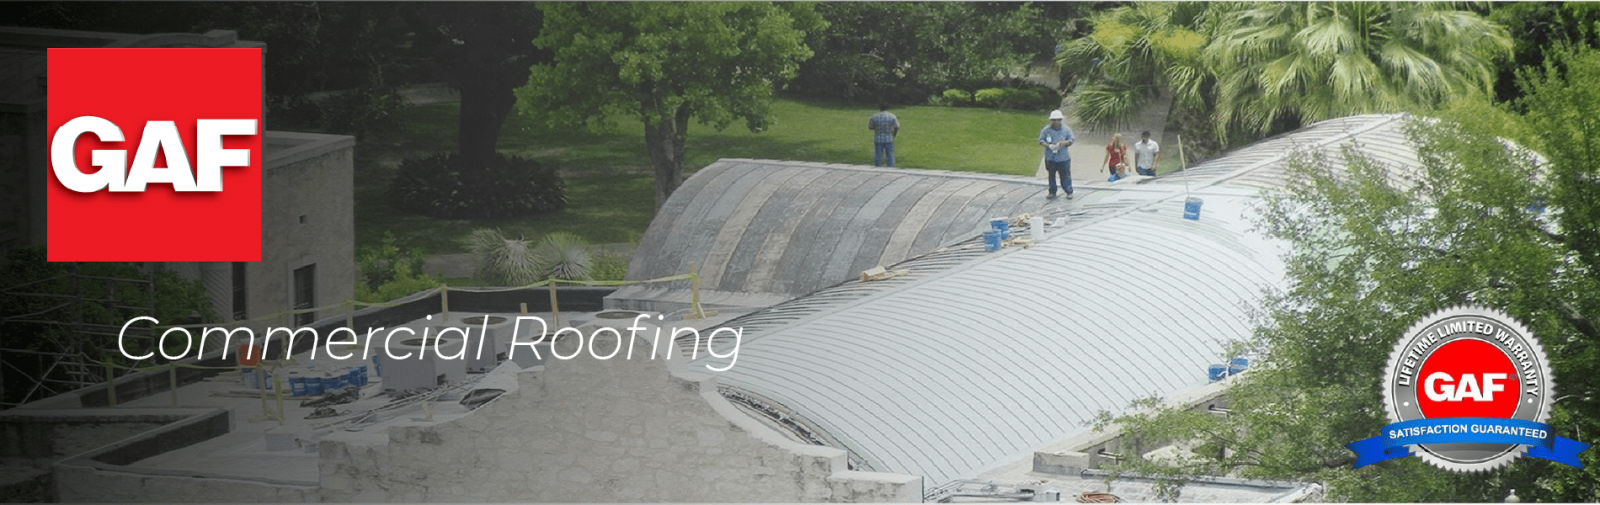 Wisdom Roofing Images